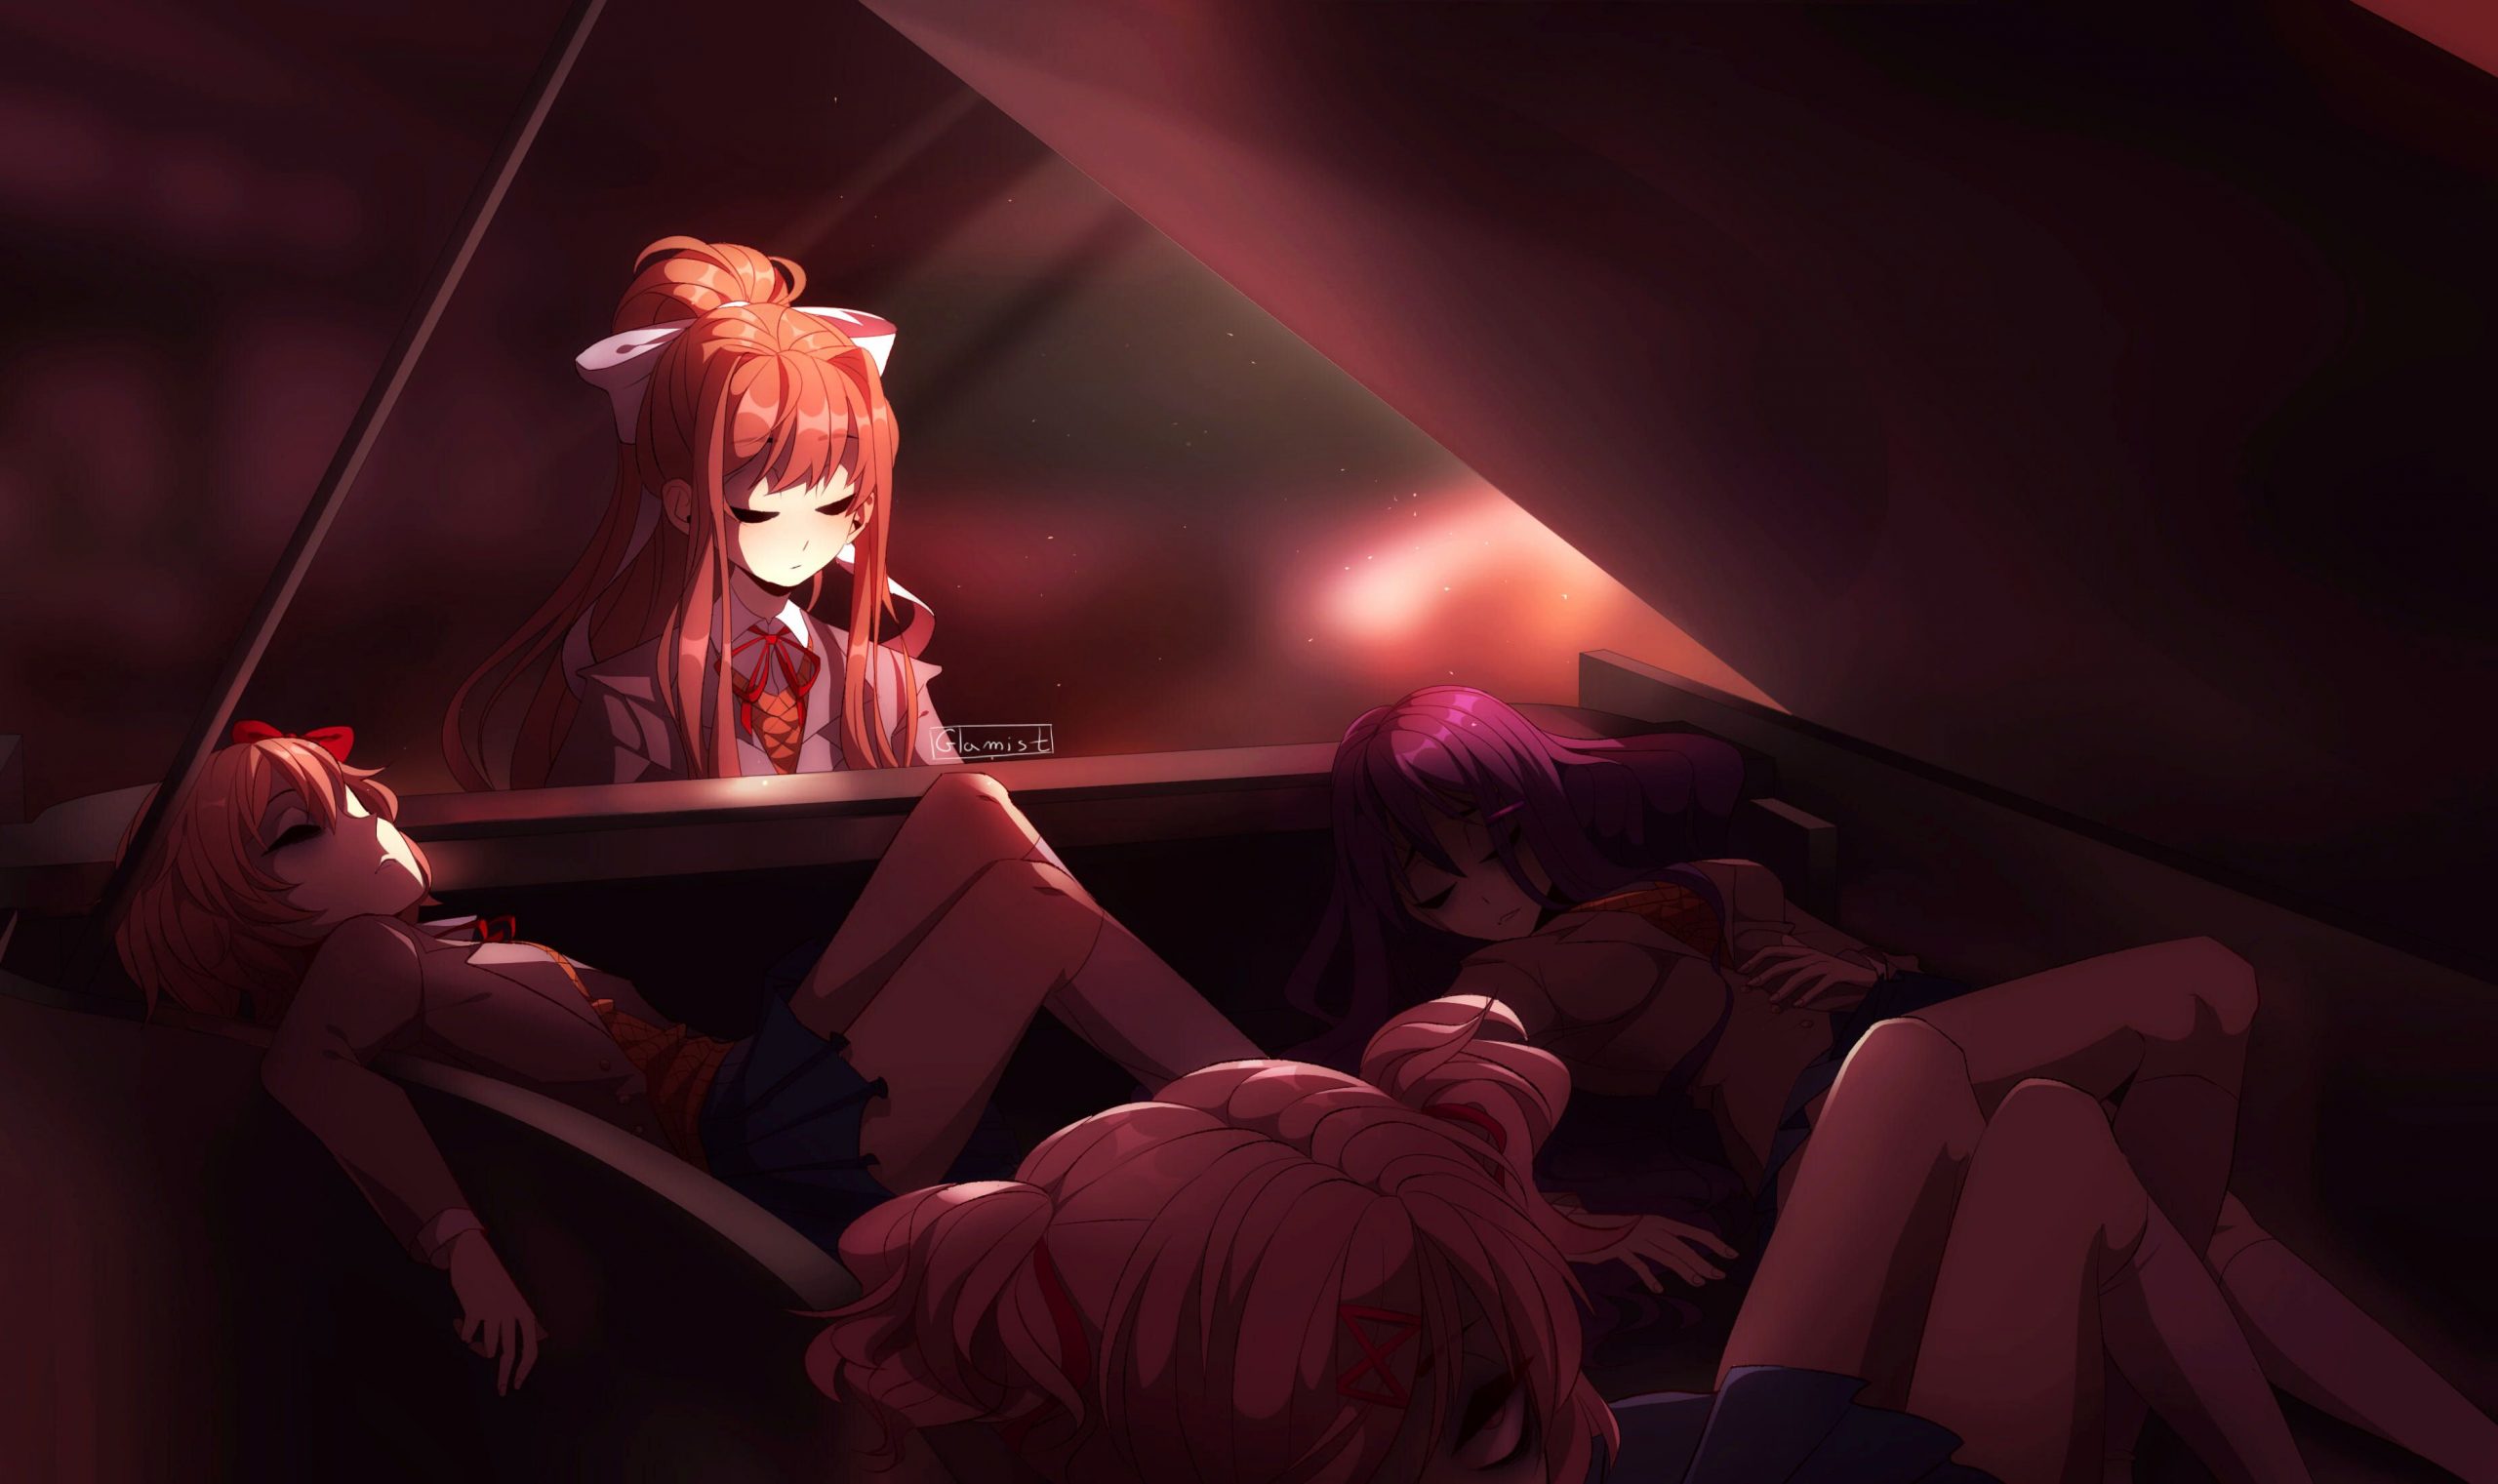 Monika and me again~ (Monika after story) by AbbyArtsketch on